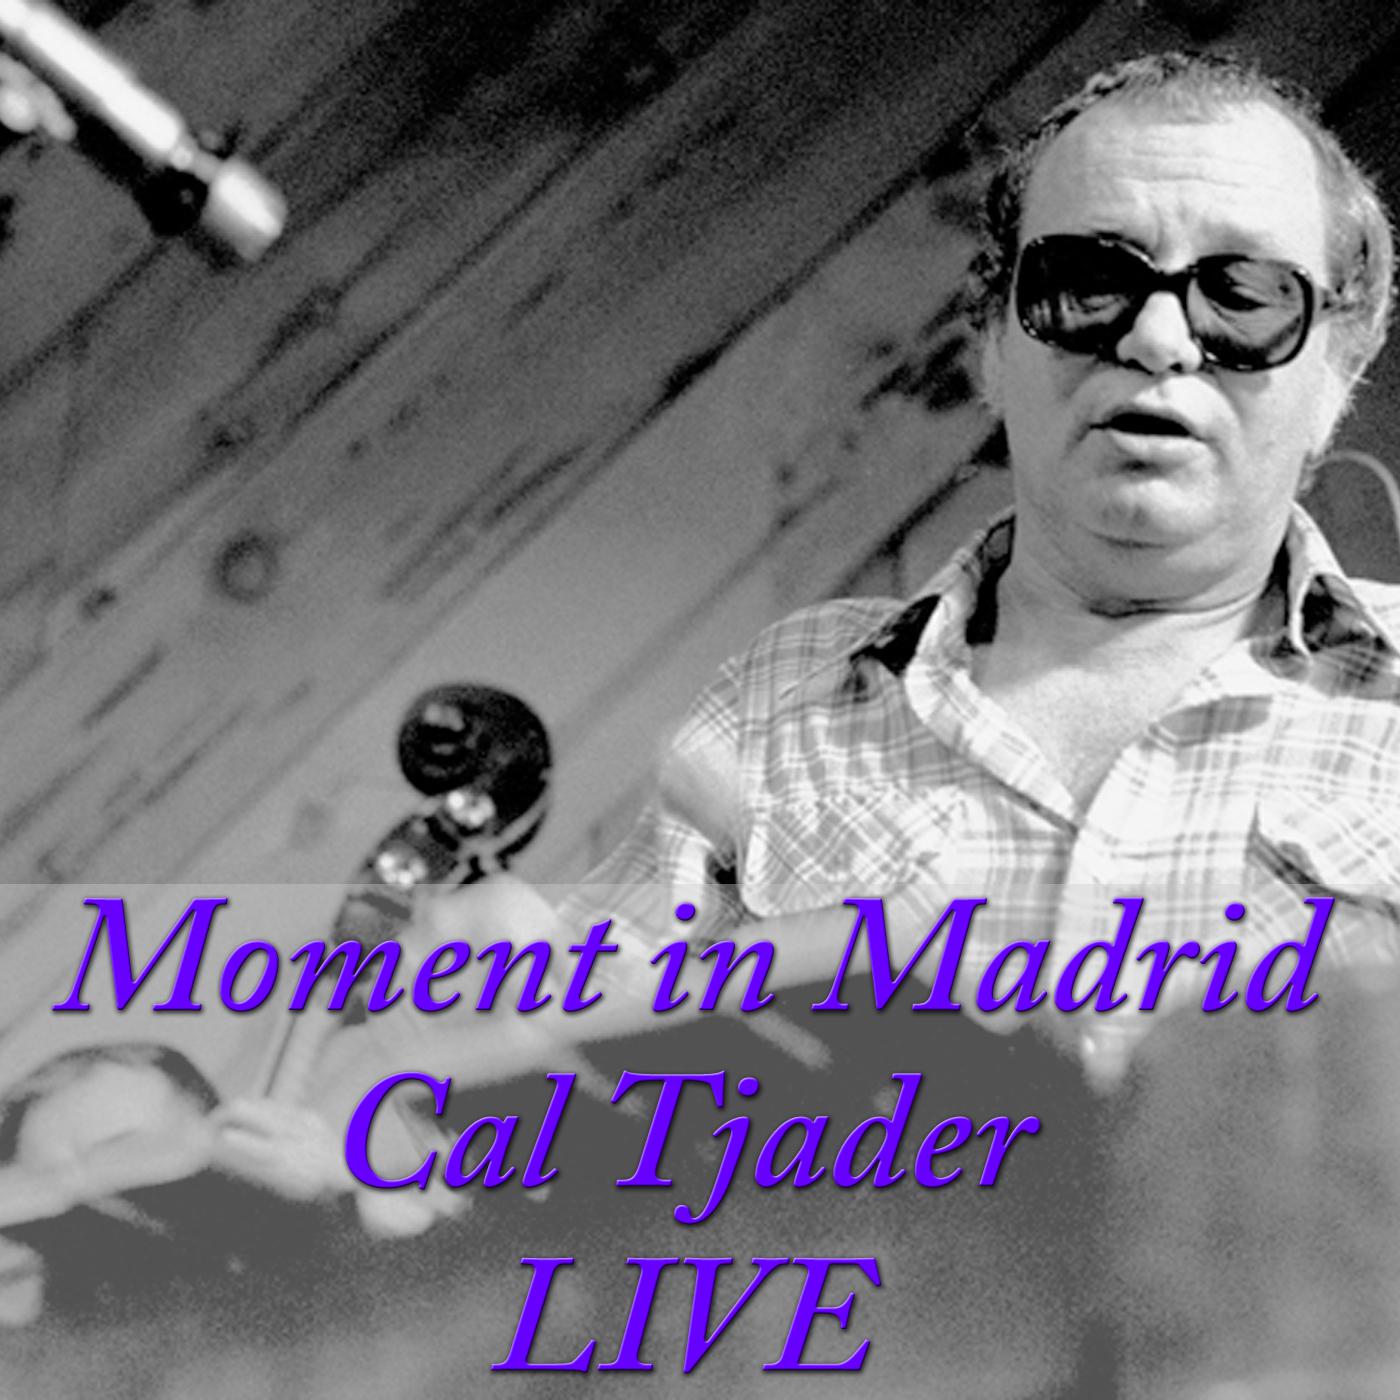 Moment in Madrid (Live)